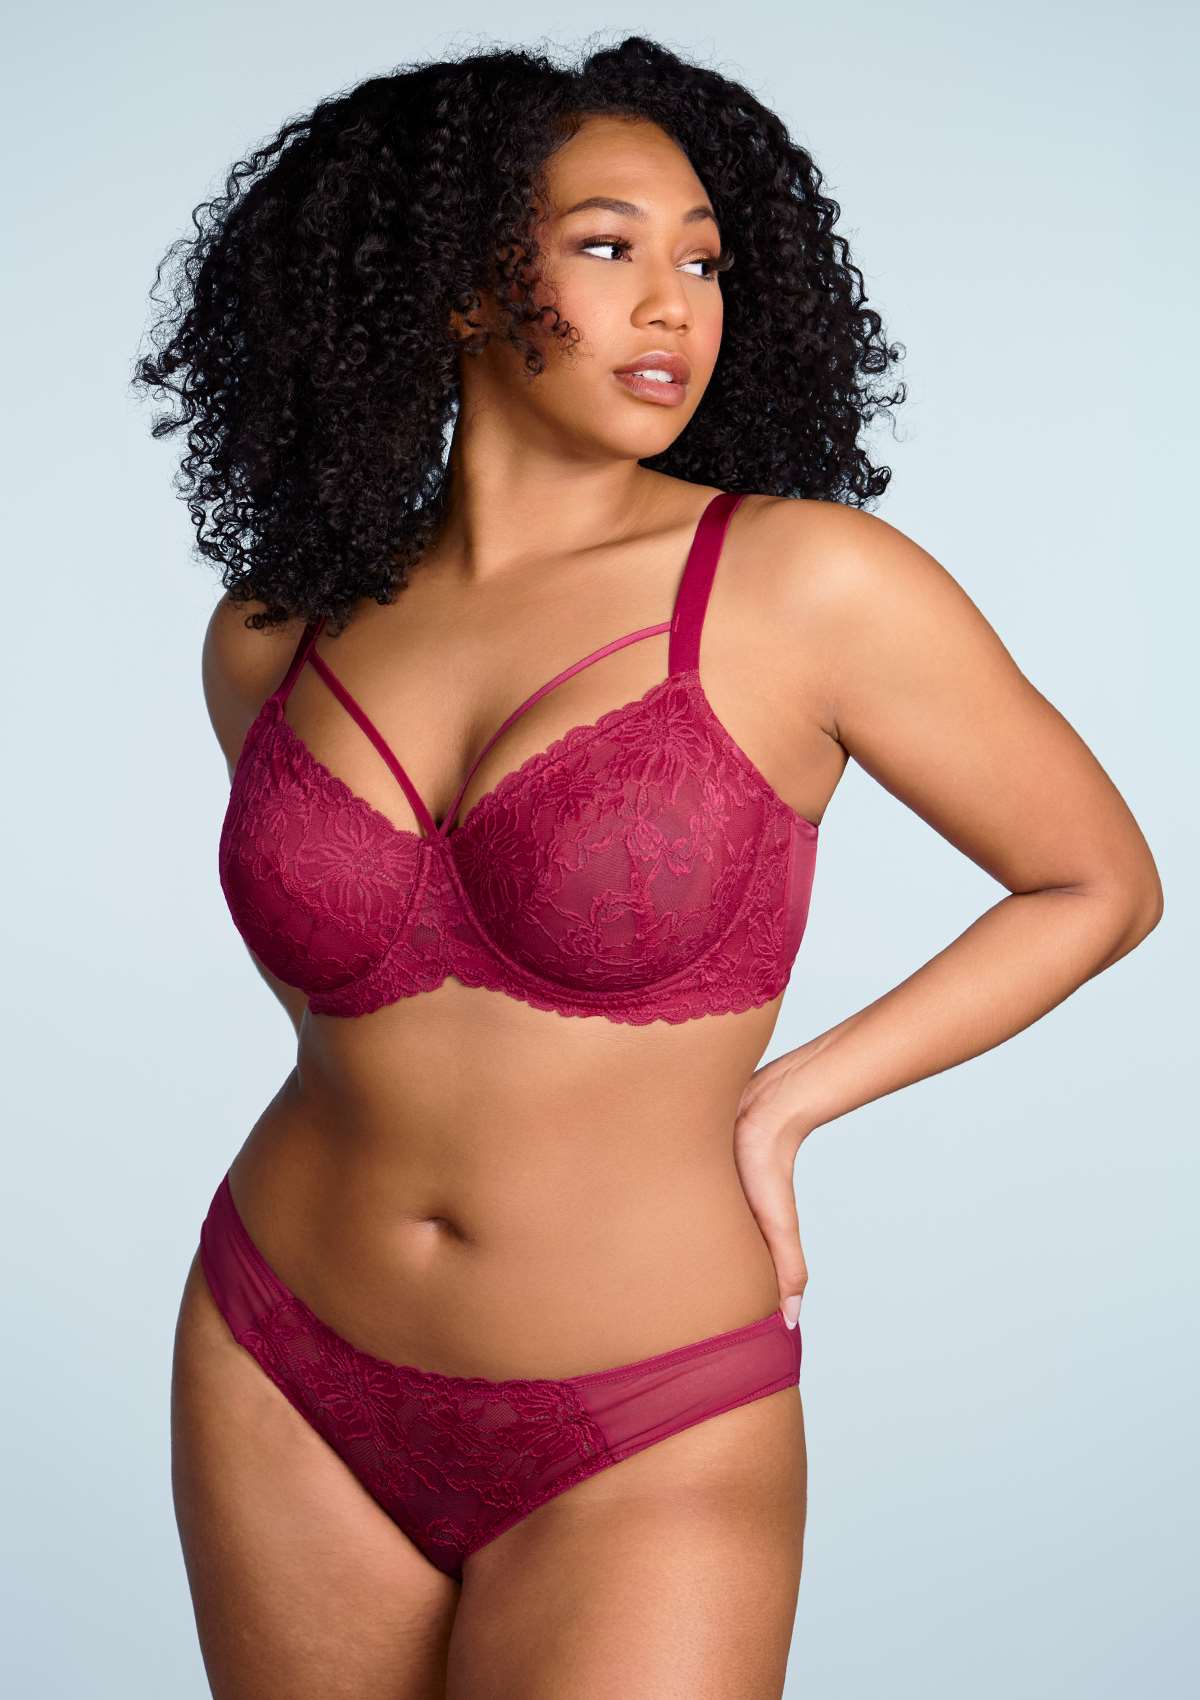 HSIA Pretty In Petals Lace Panties And Bra Set: Plus Size Women Bra - Red / 40 / G